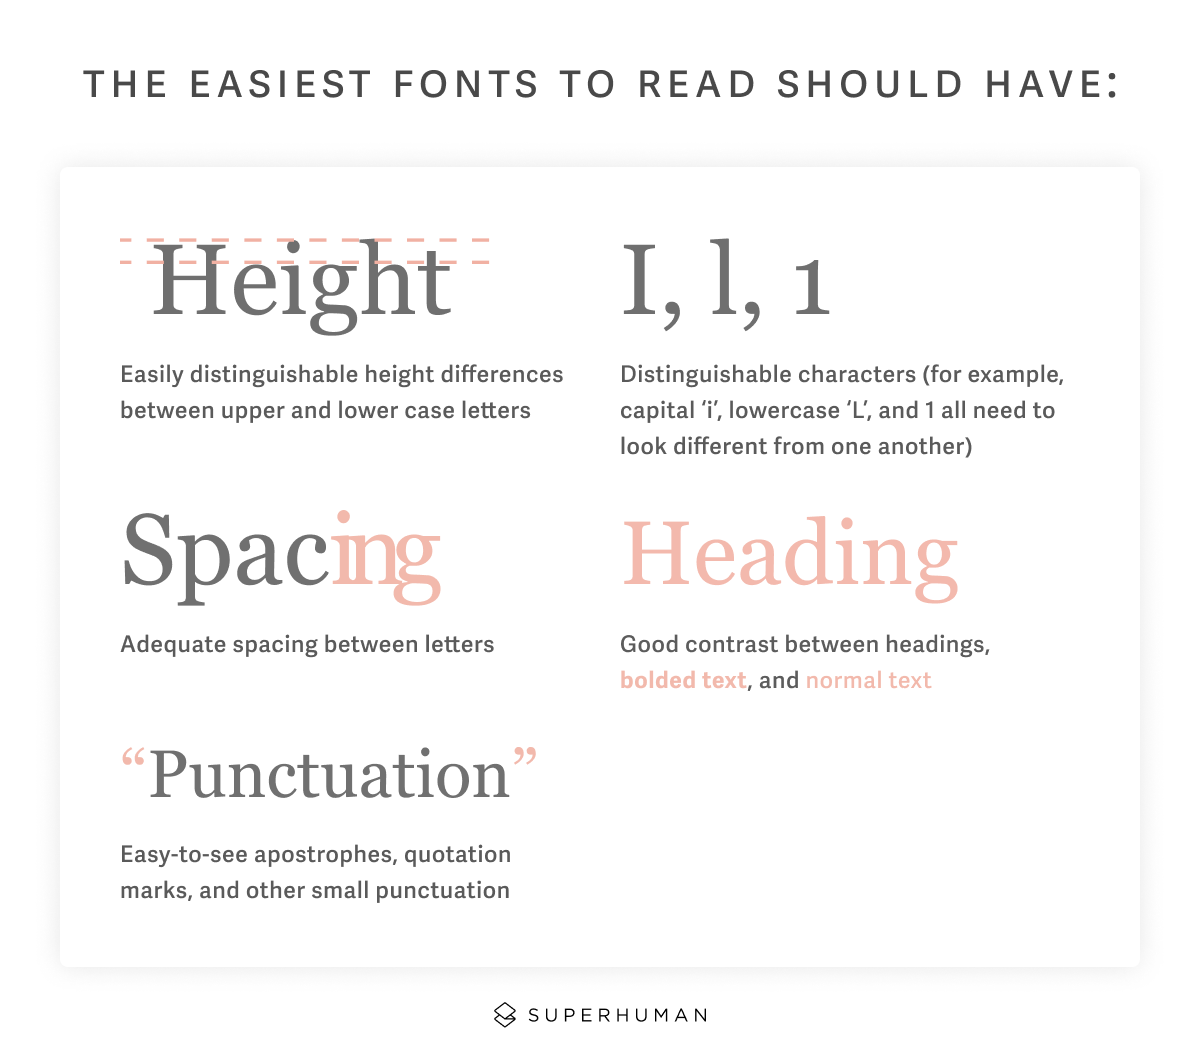 What are the easiest fonts to read? - Superhuman Blog